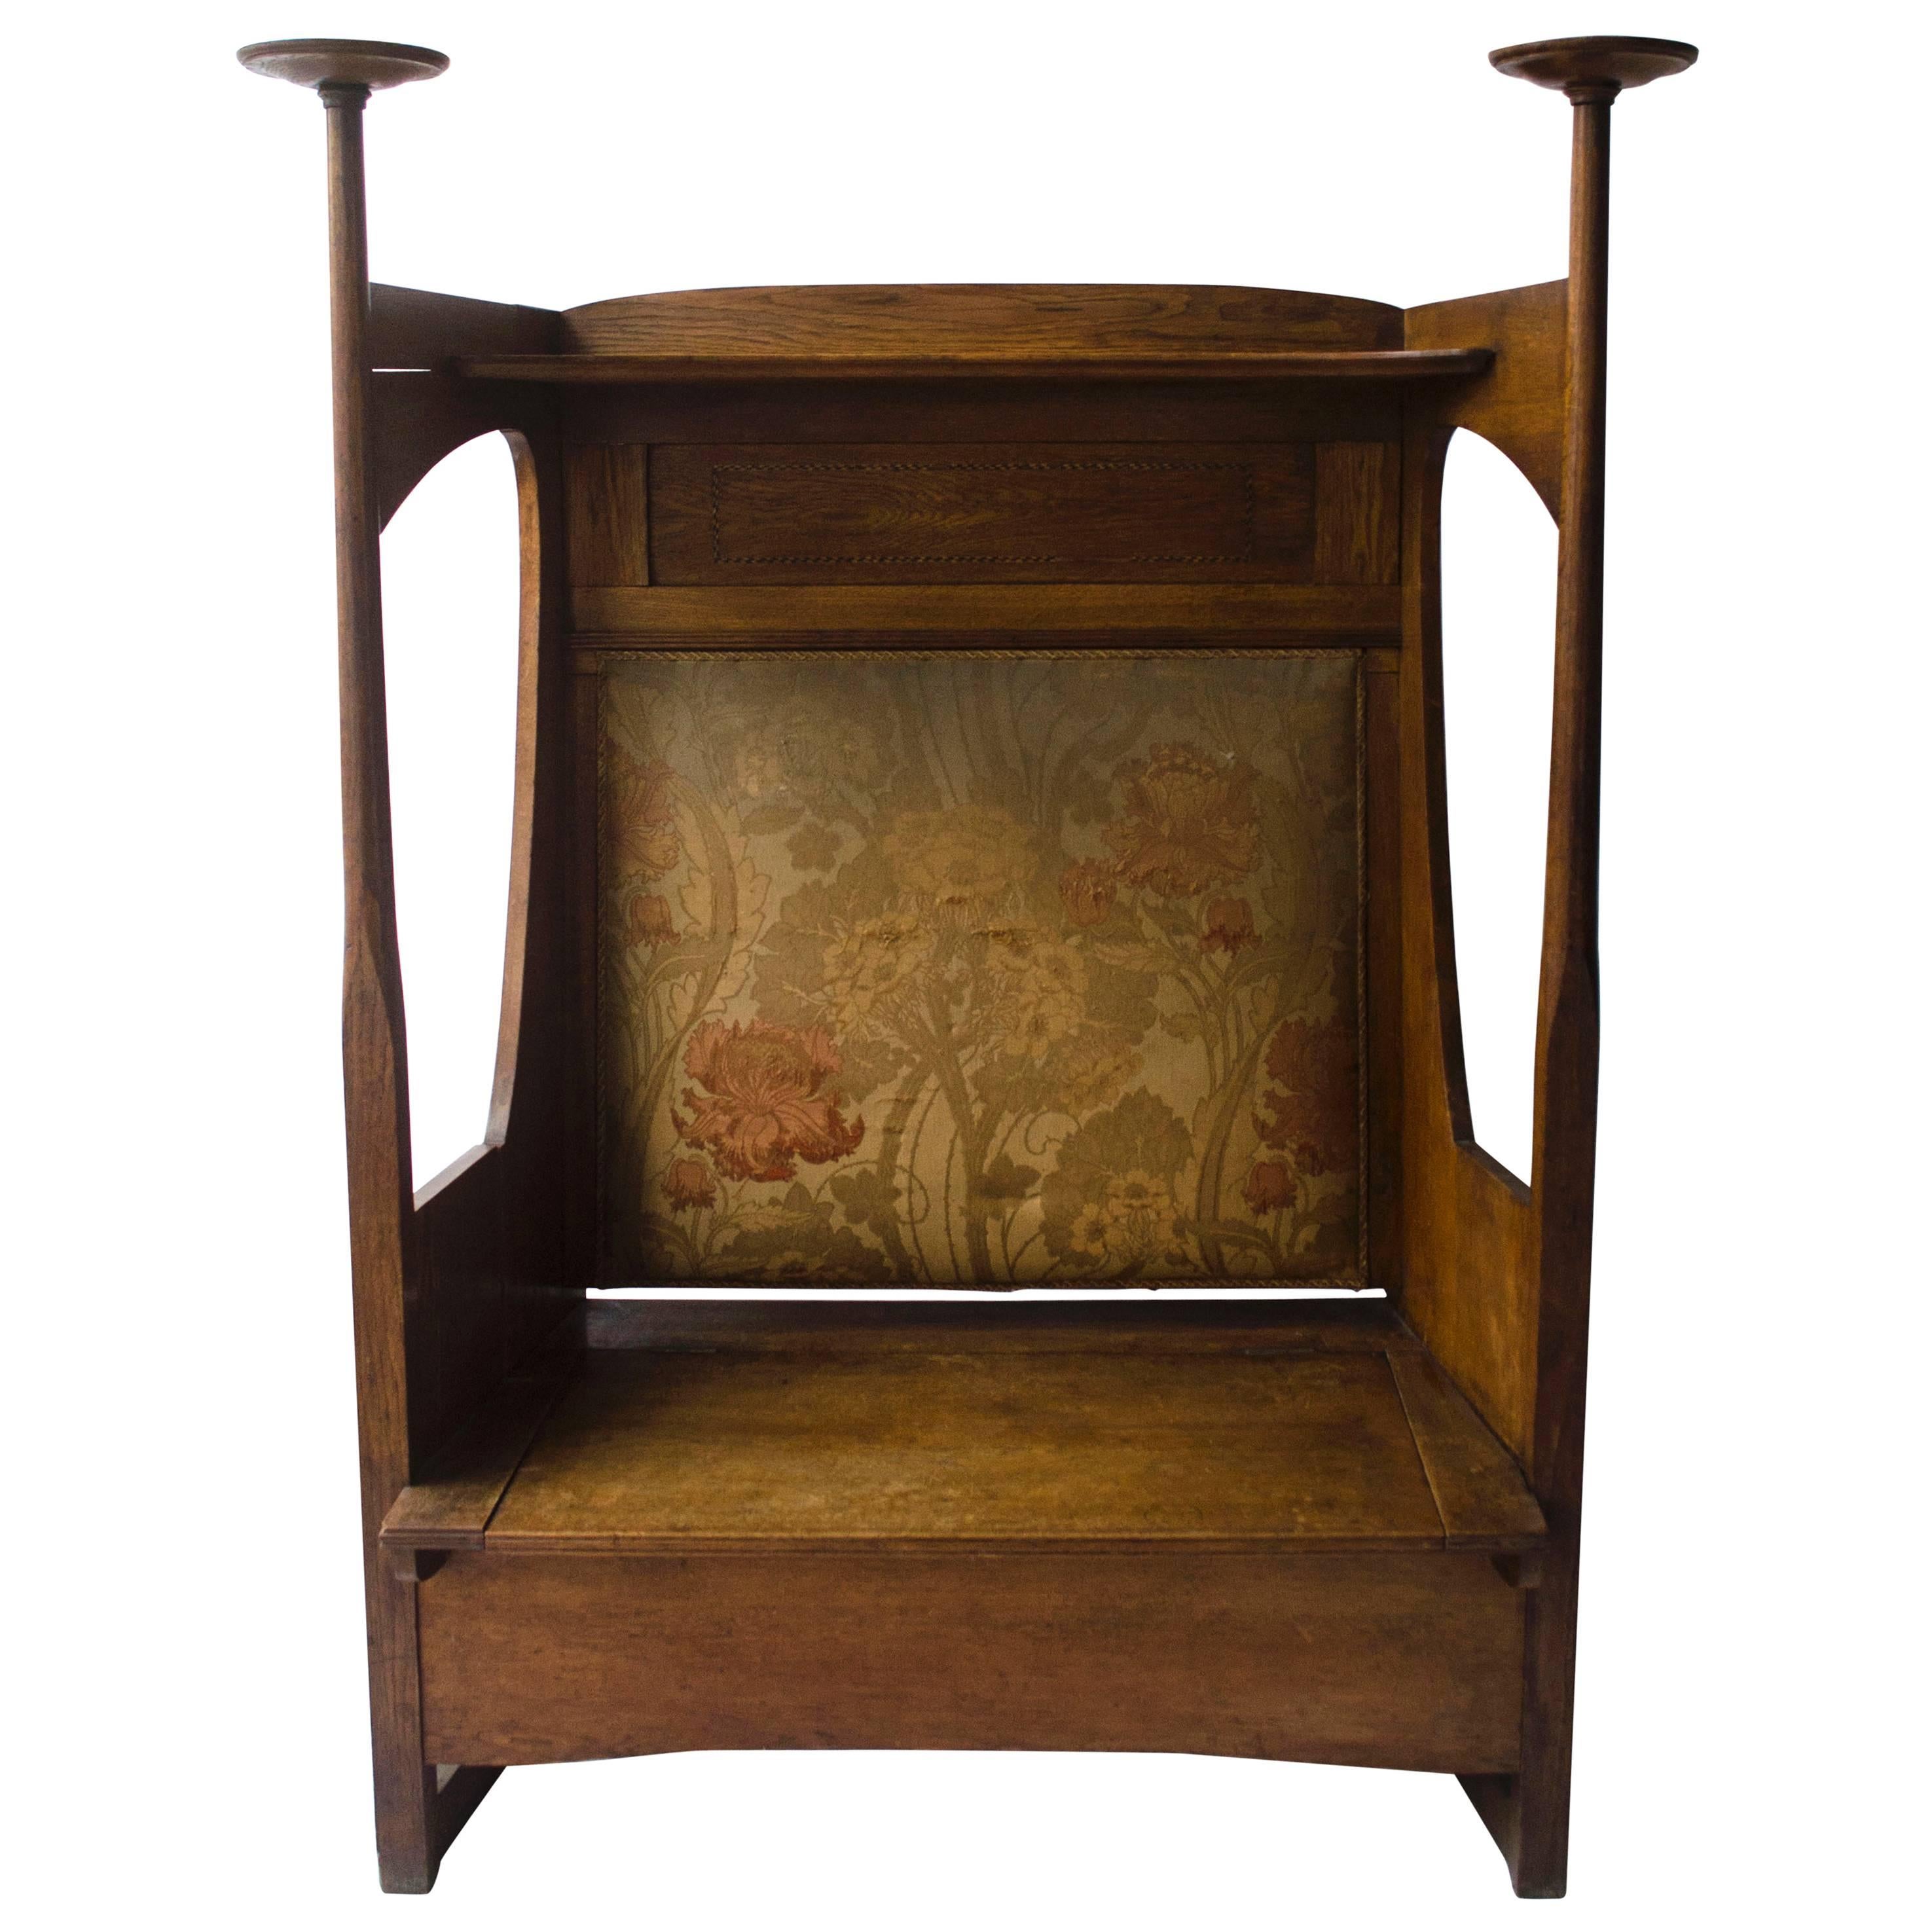 Liberty & Co. An Arts & Crafts Oak Settle in the Style of CFA Voysey